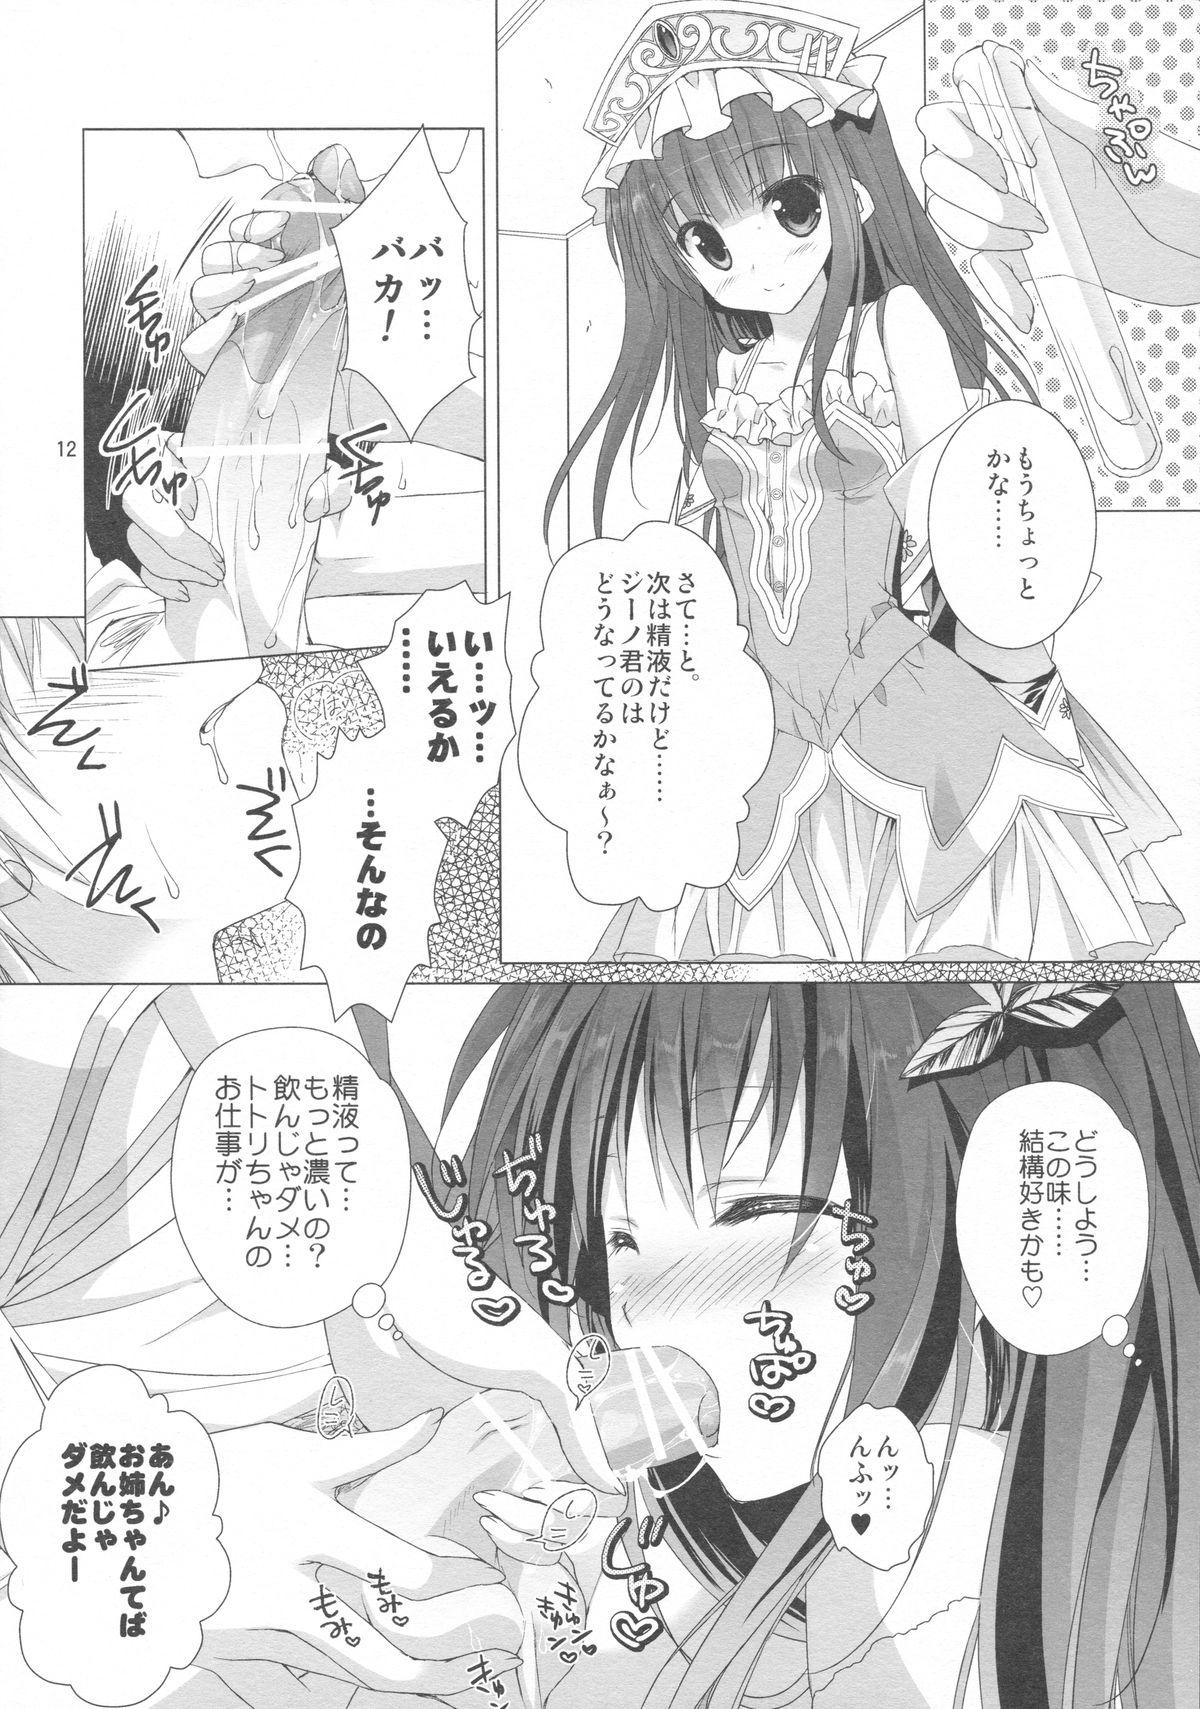 Blows 2-Shuume no True End - Atelier totori Monstercock - Page 10